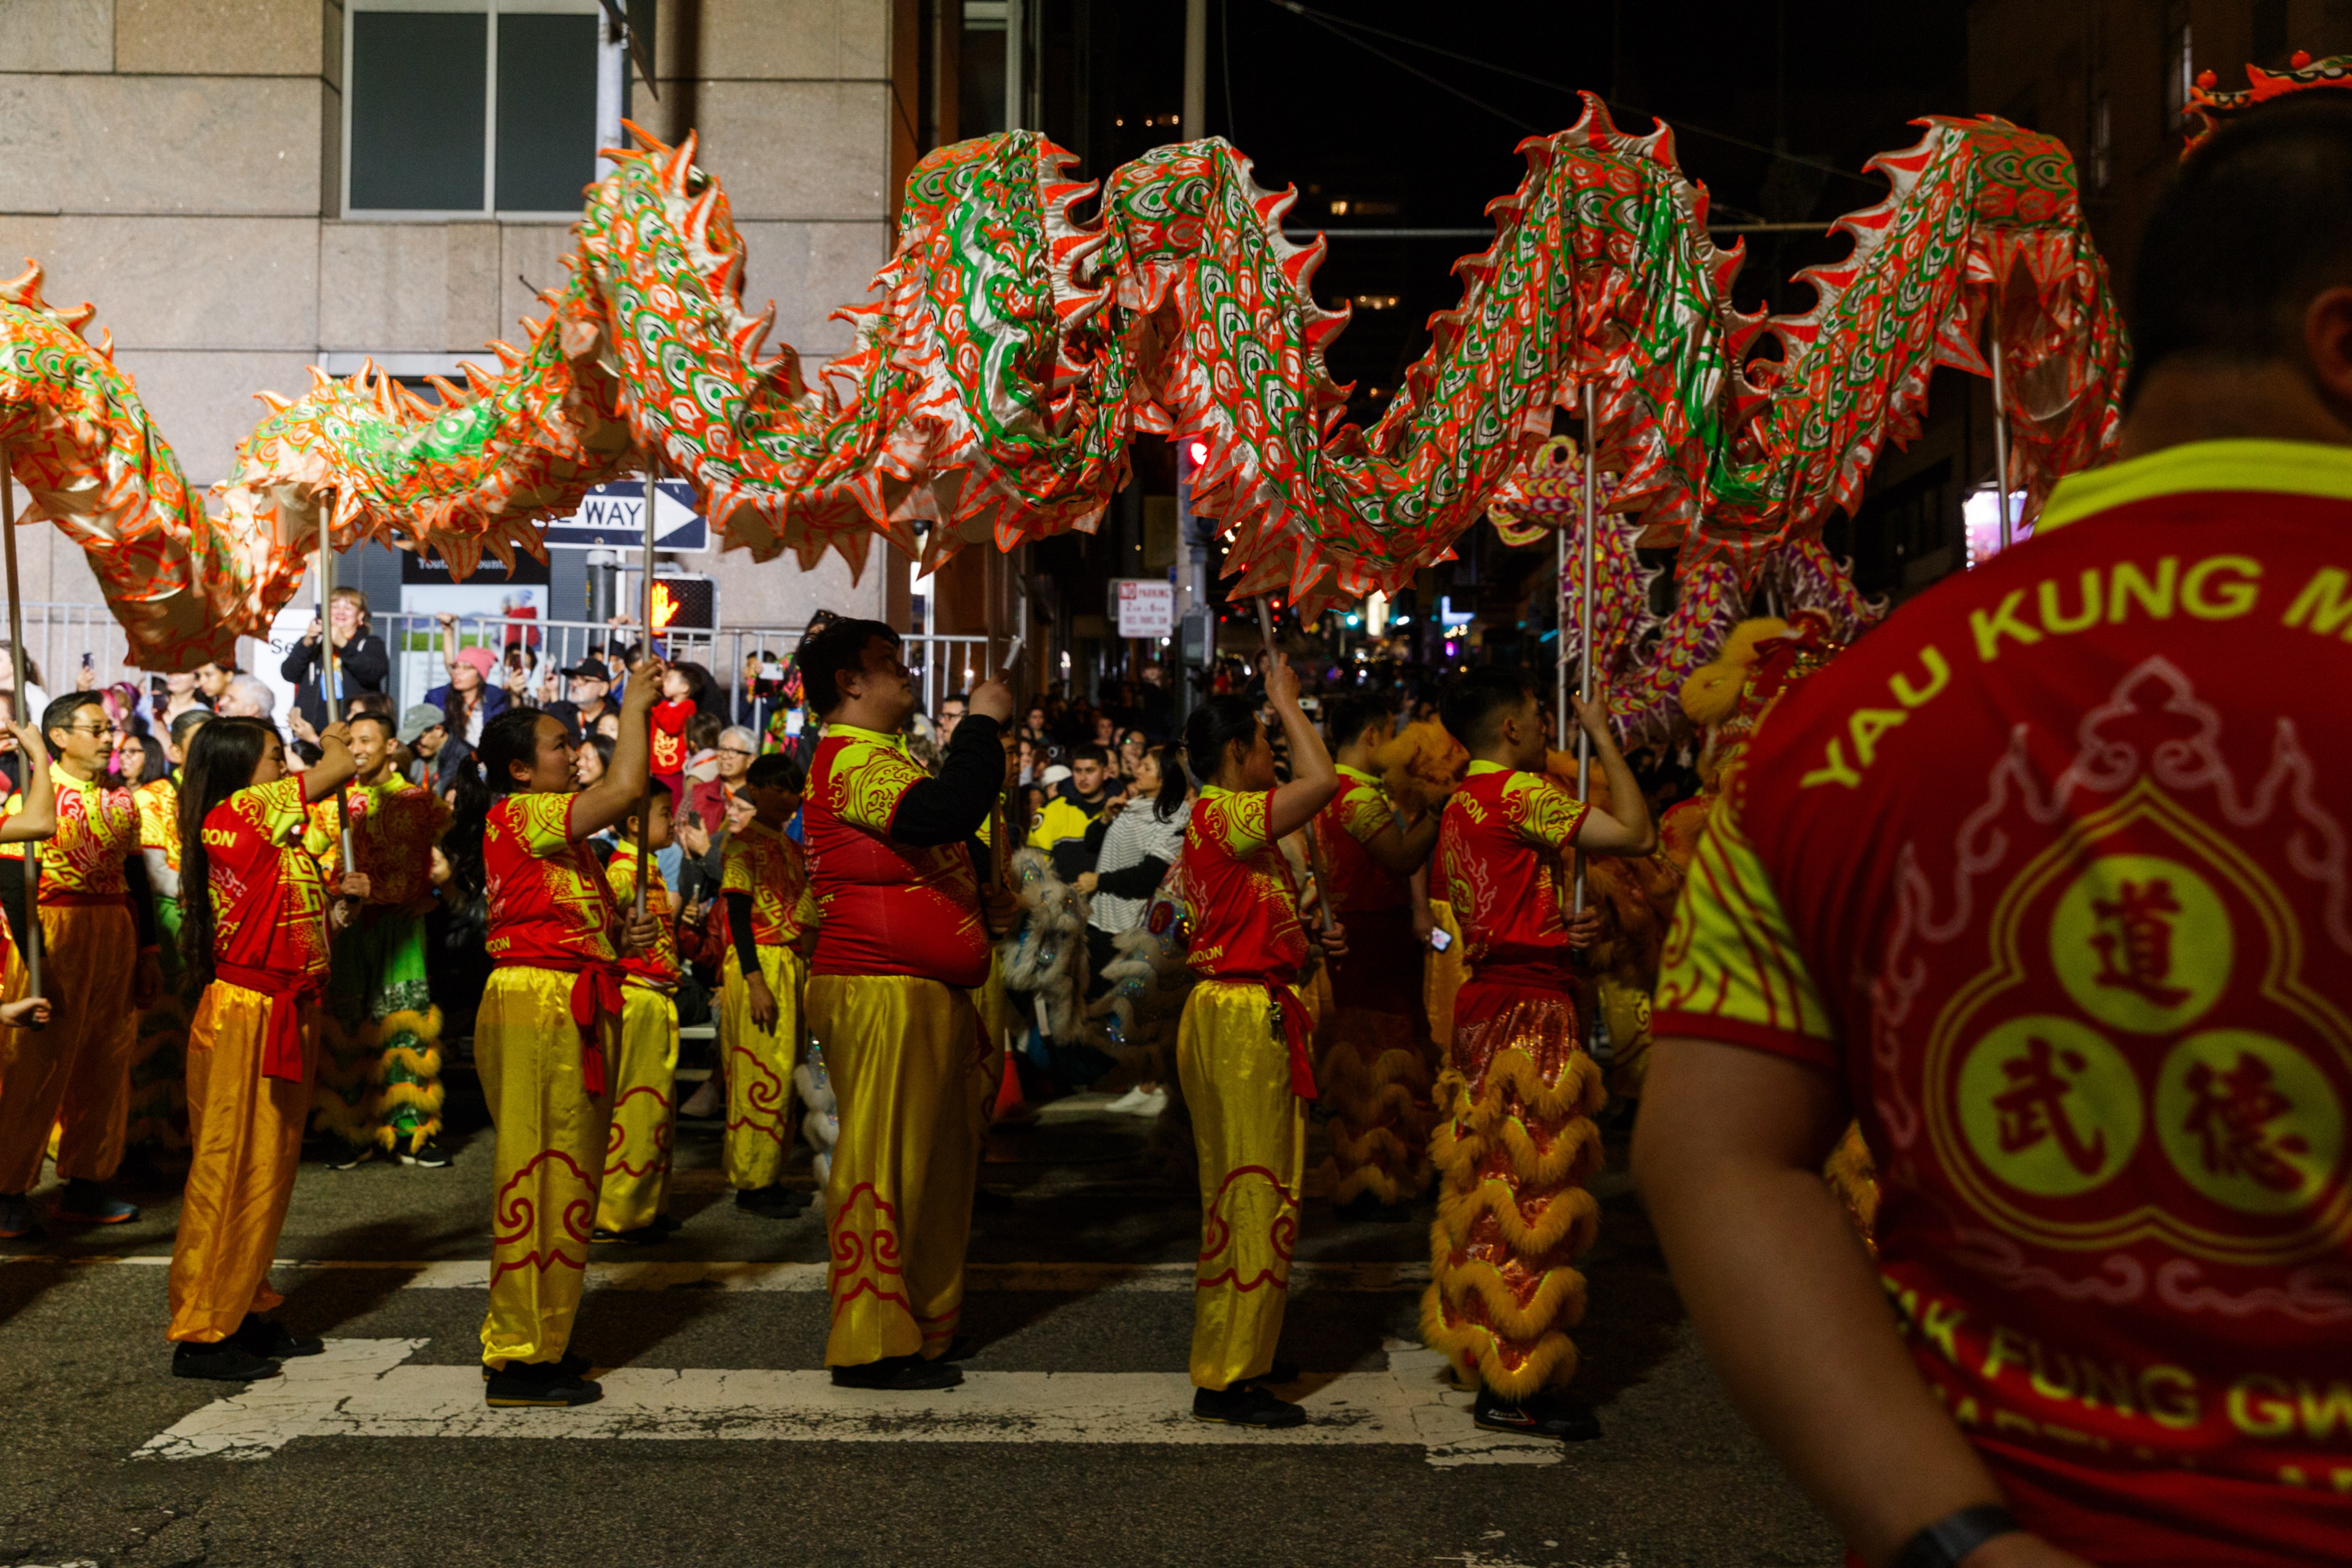 Performers in traditional attire carry a fiery red and green dragon in a vibrant night street parade.